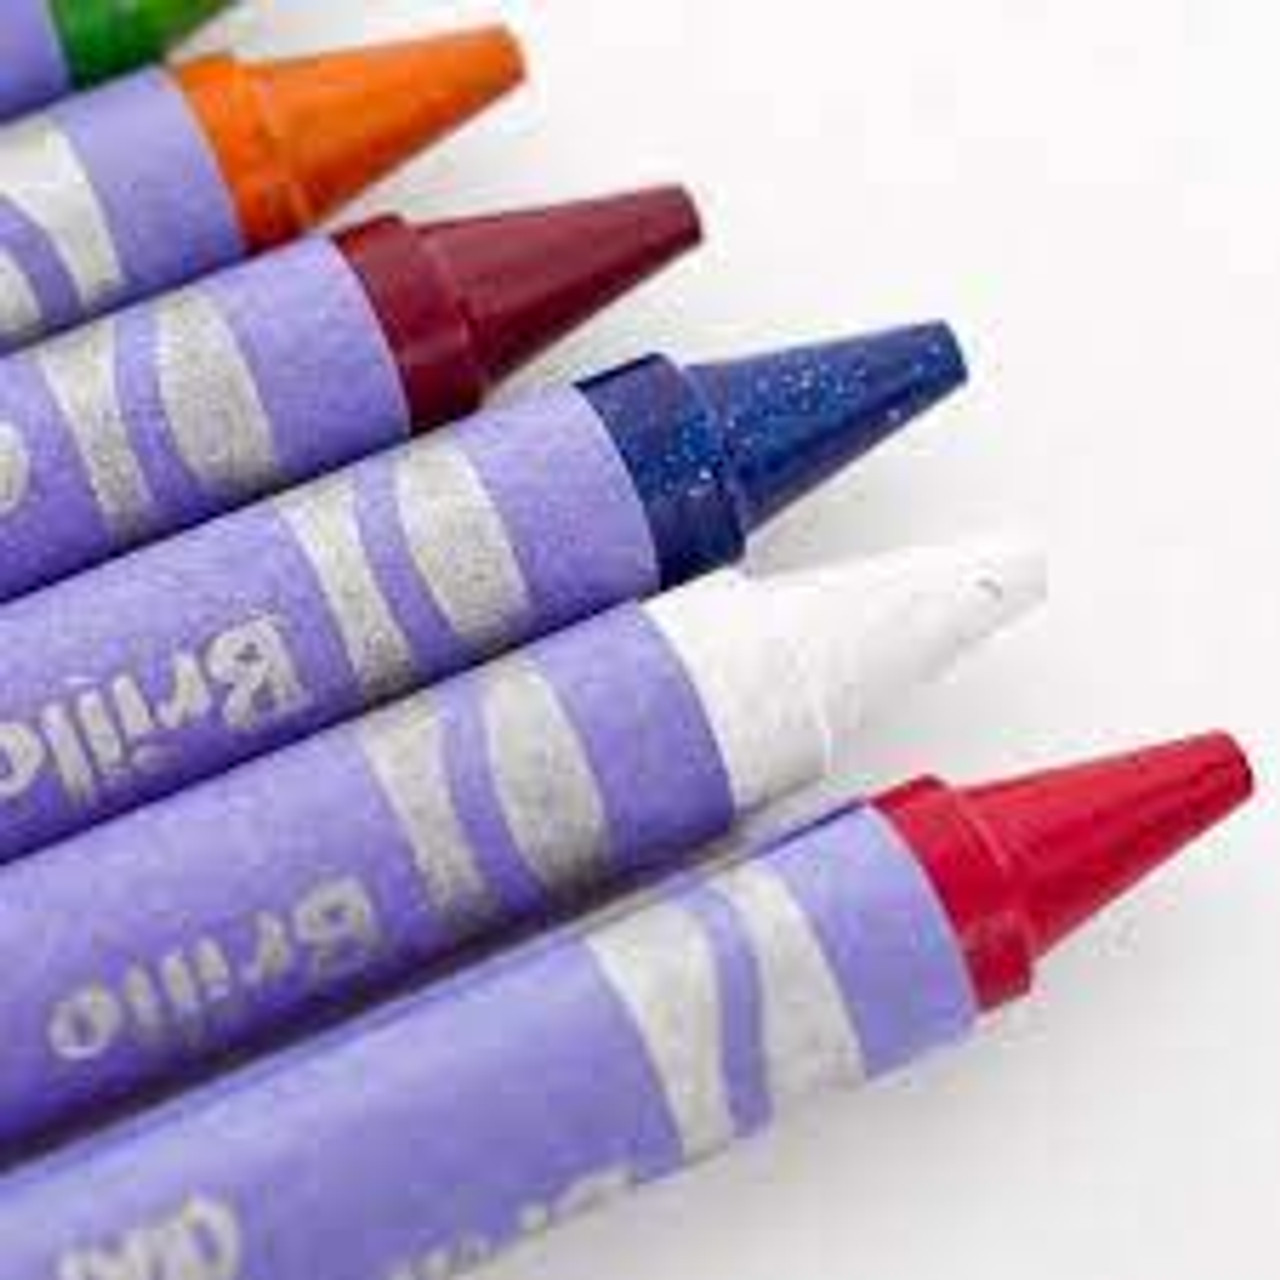 Wholesale glitter crayon For Drawing, Writing and Others 